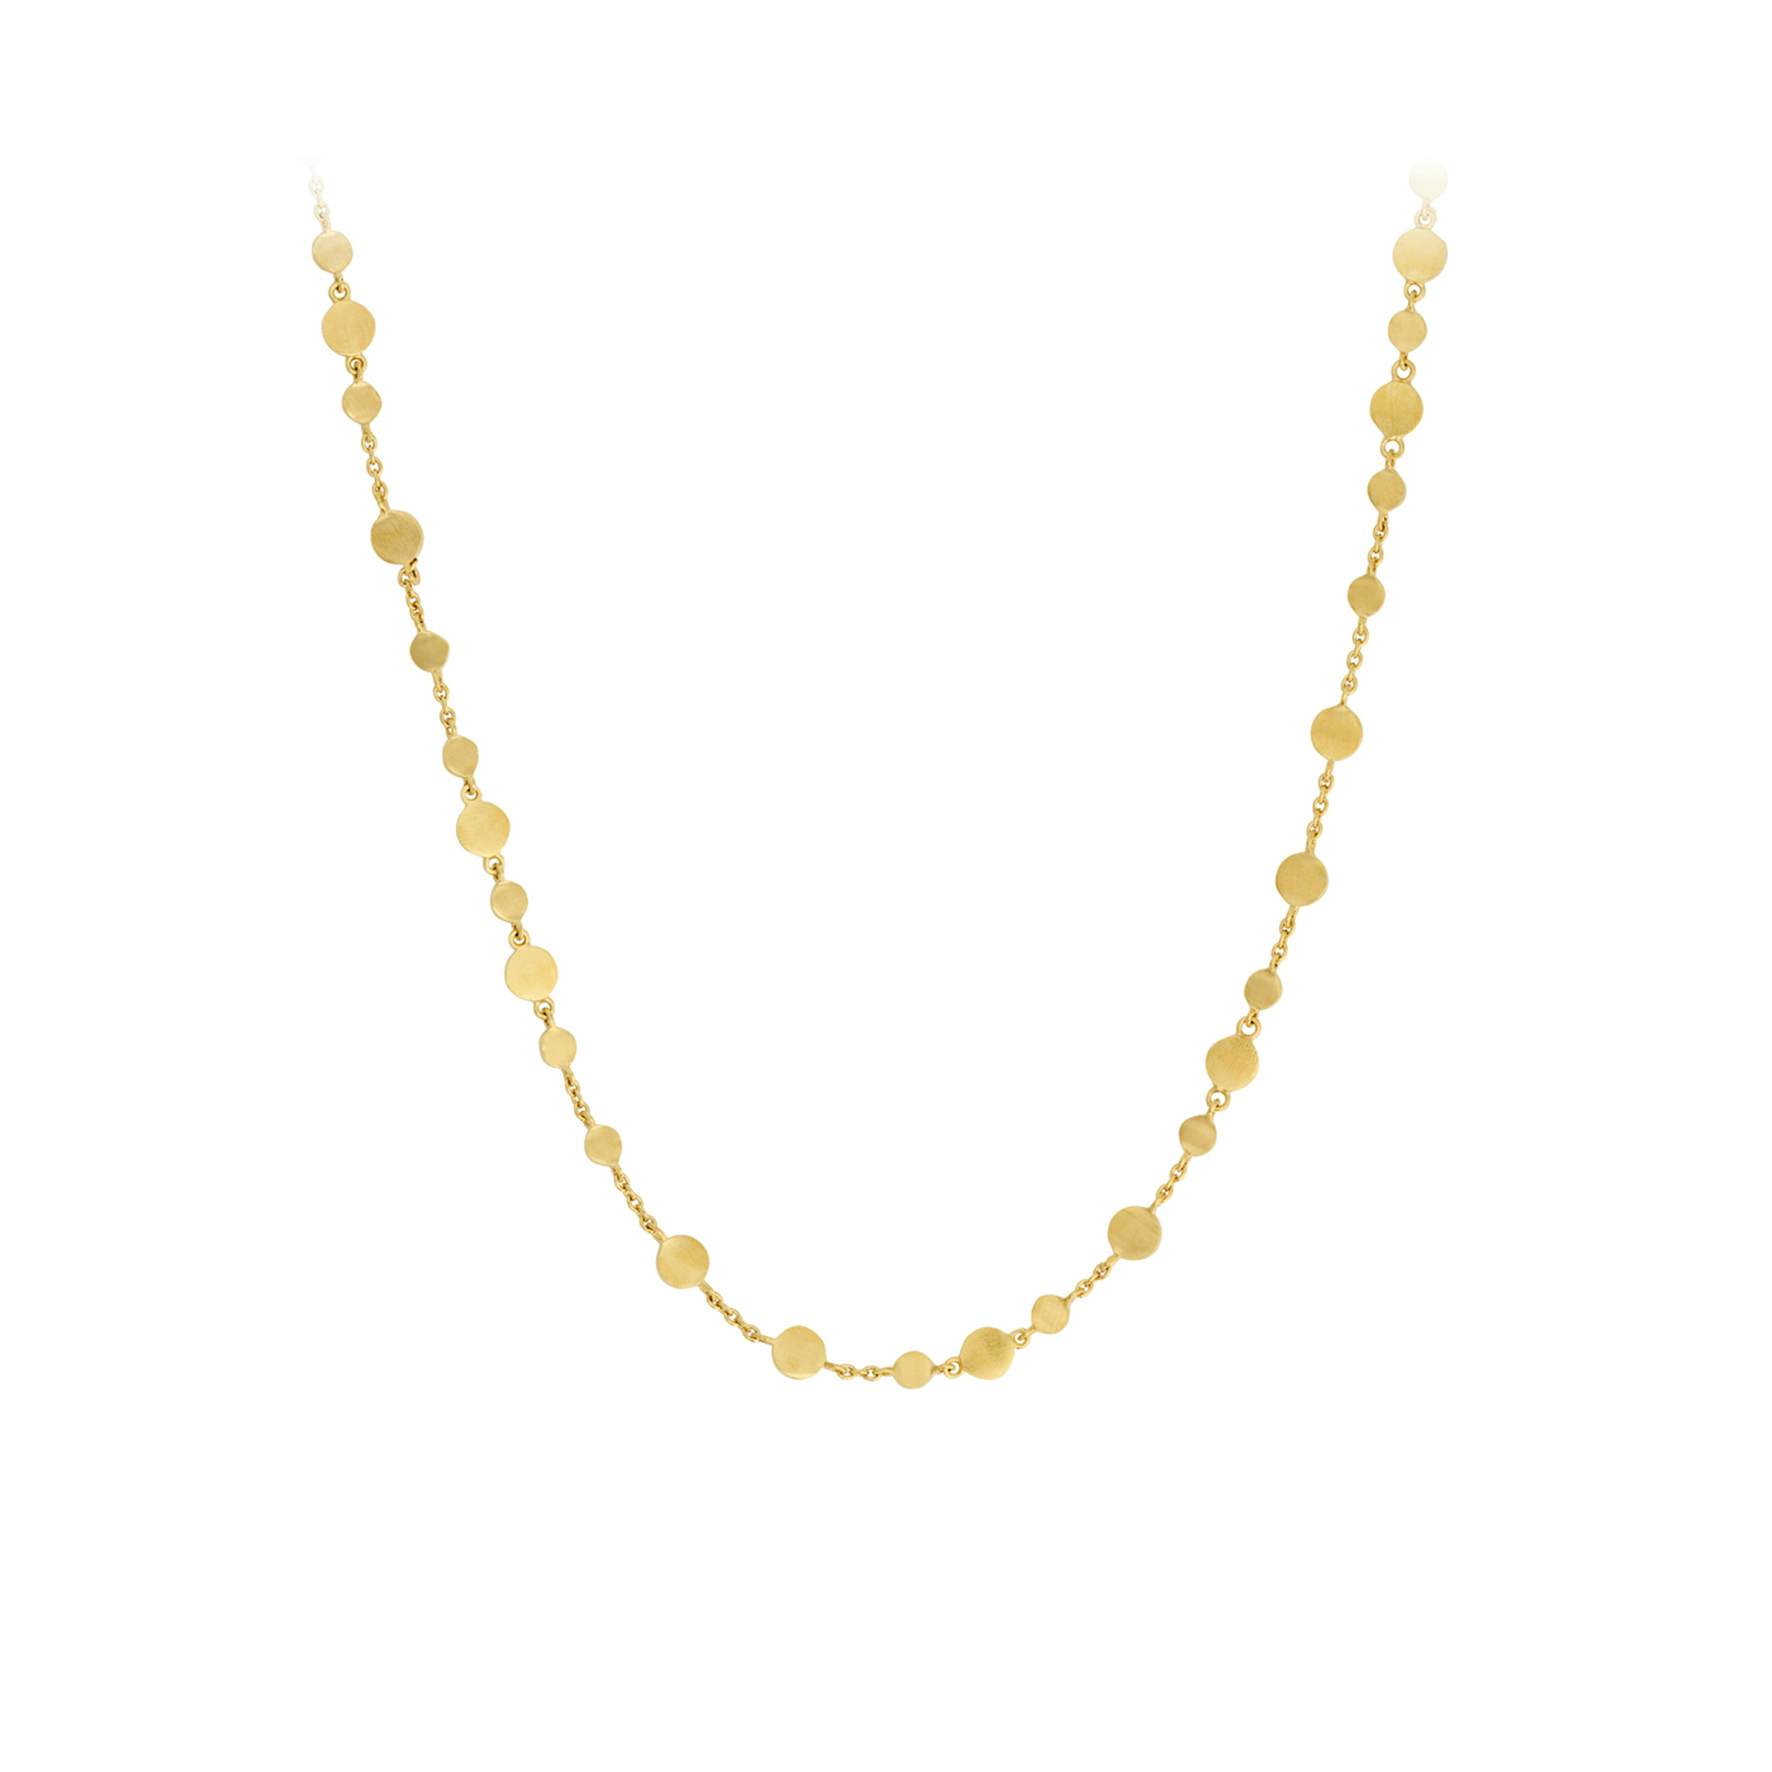 Essence Necklace from Pernille Corydon in Goldplated-Silver Sterling 925